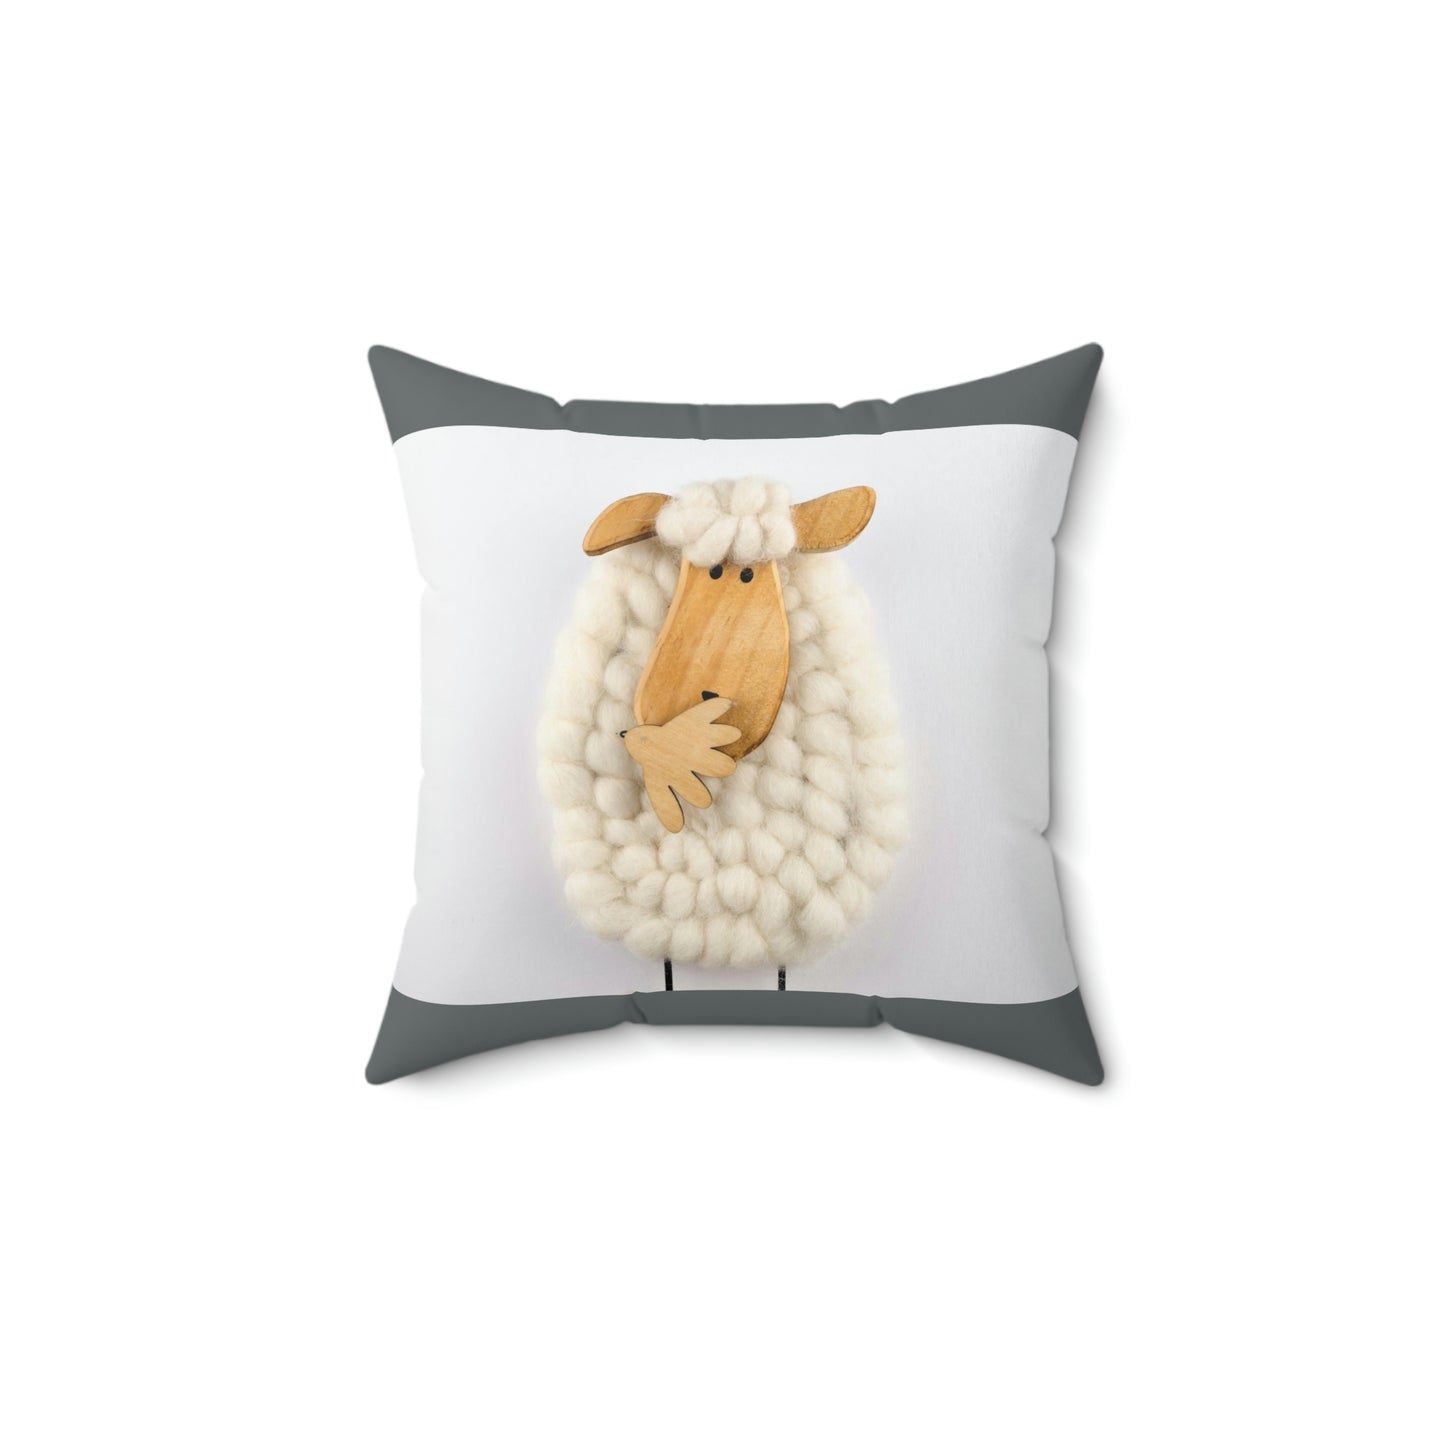 Sheep Pillow Case - Dark Gray and White Colors - Faux Suede Square Pillow Case